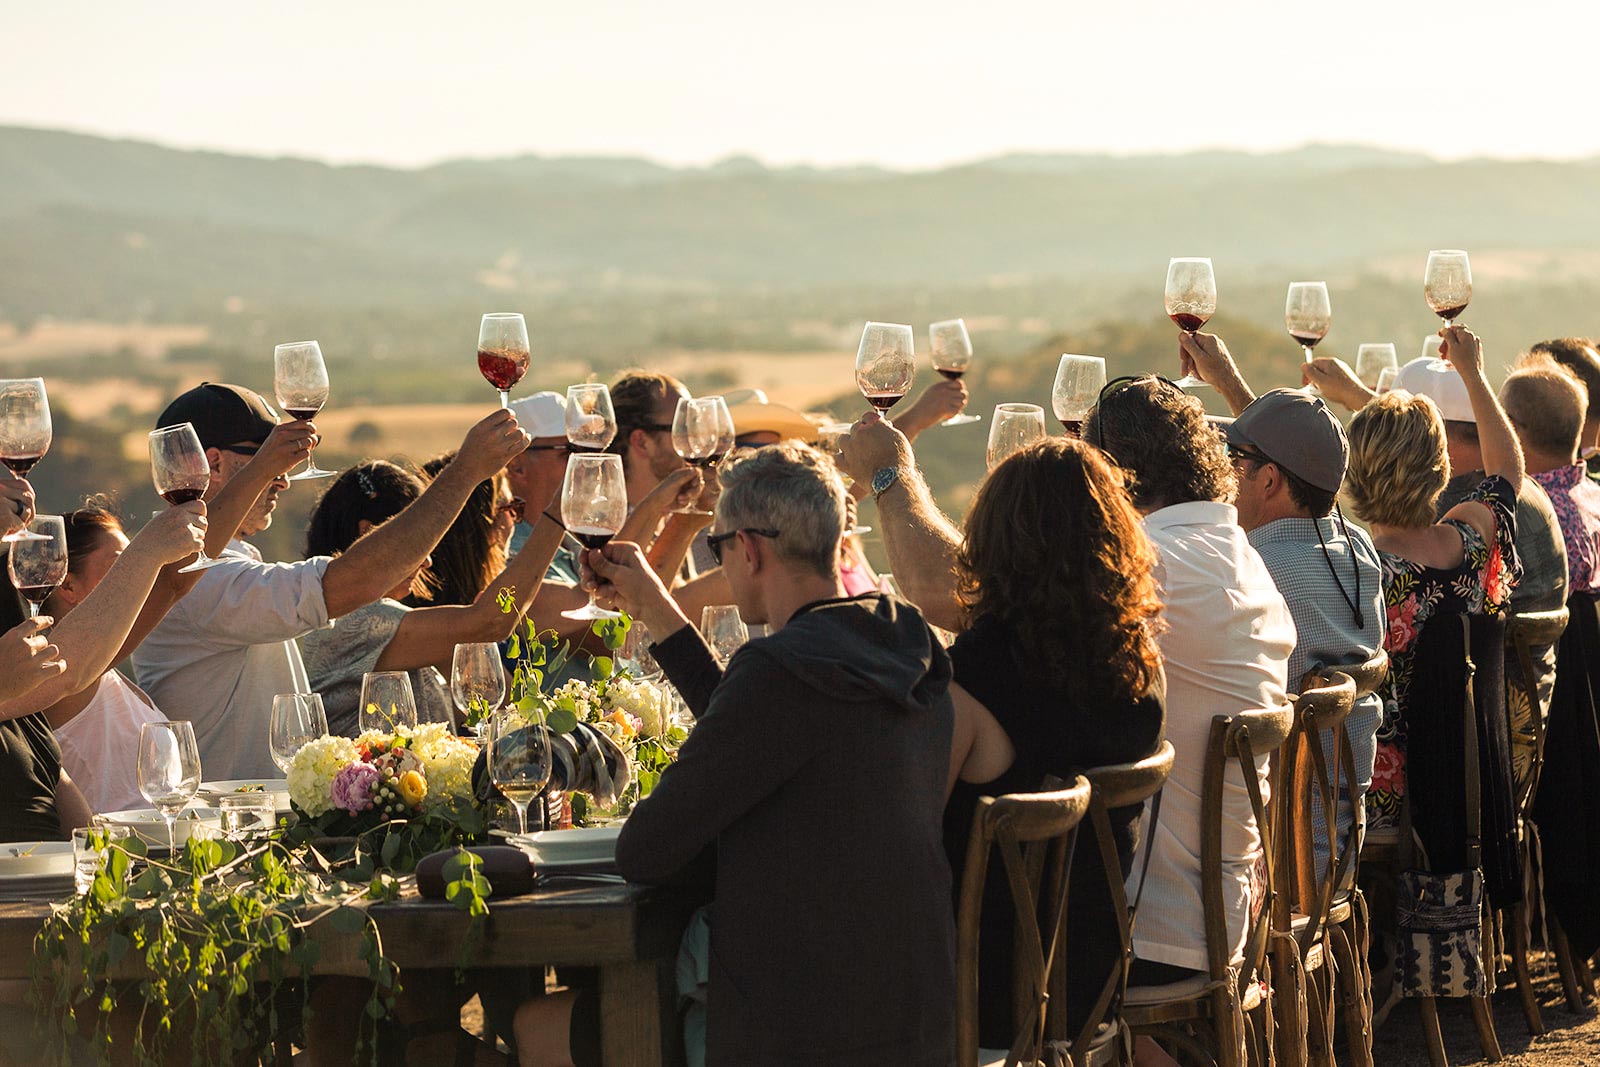 People sitting at a table at an outdoor event, toasting their wine glasses